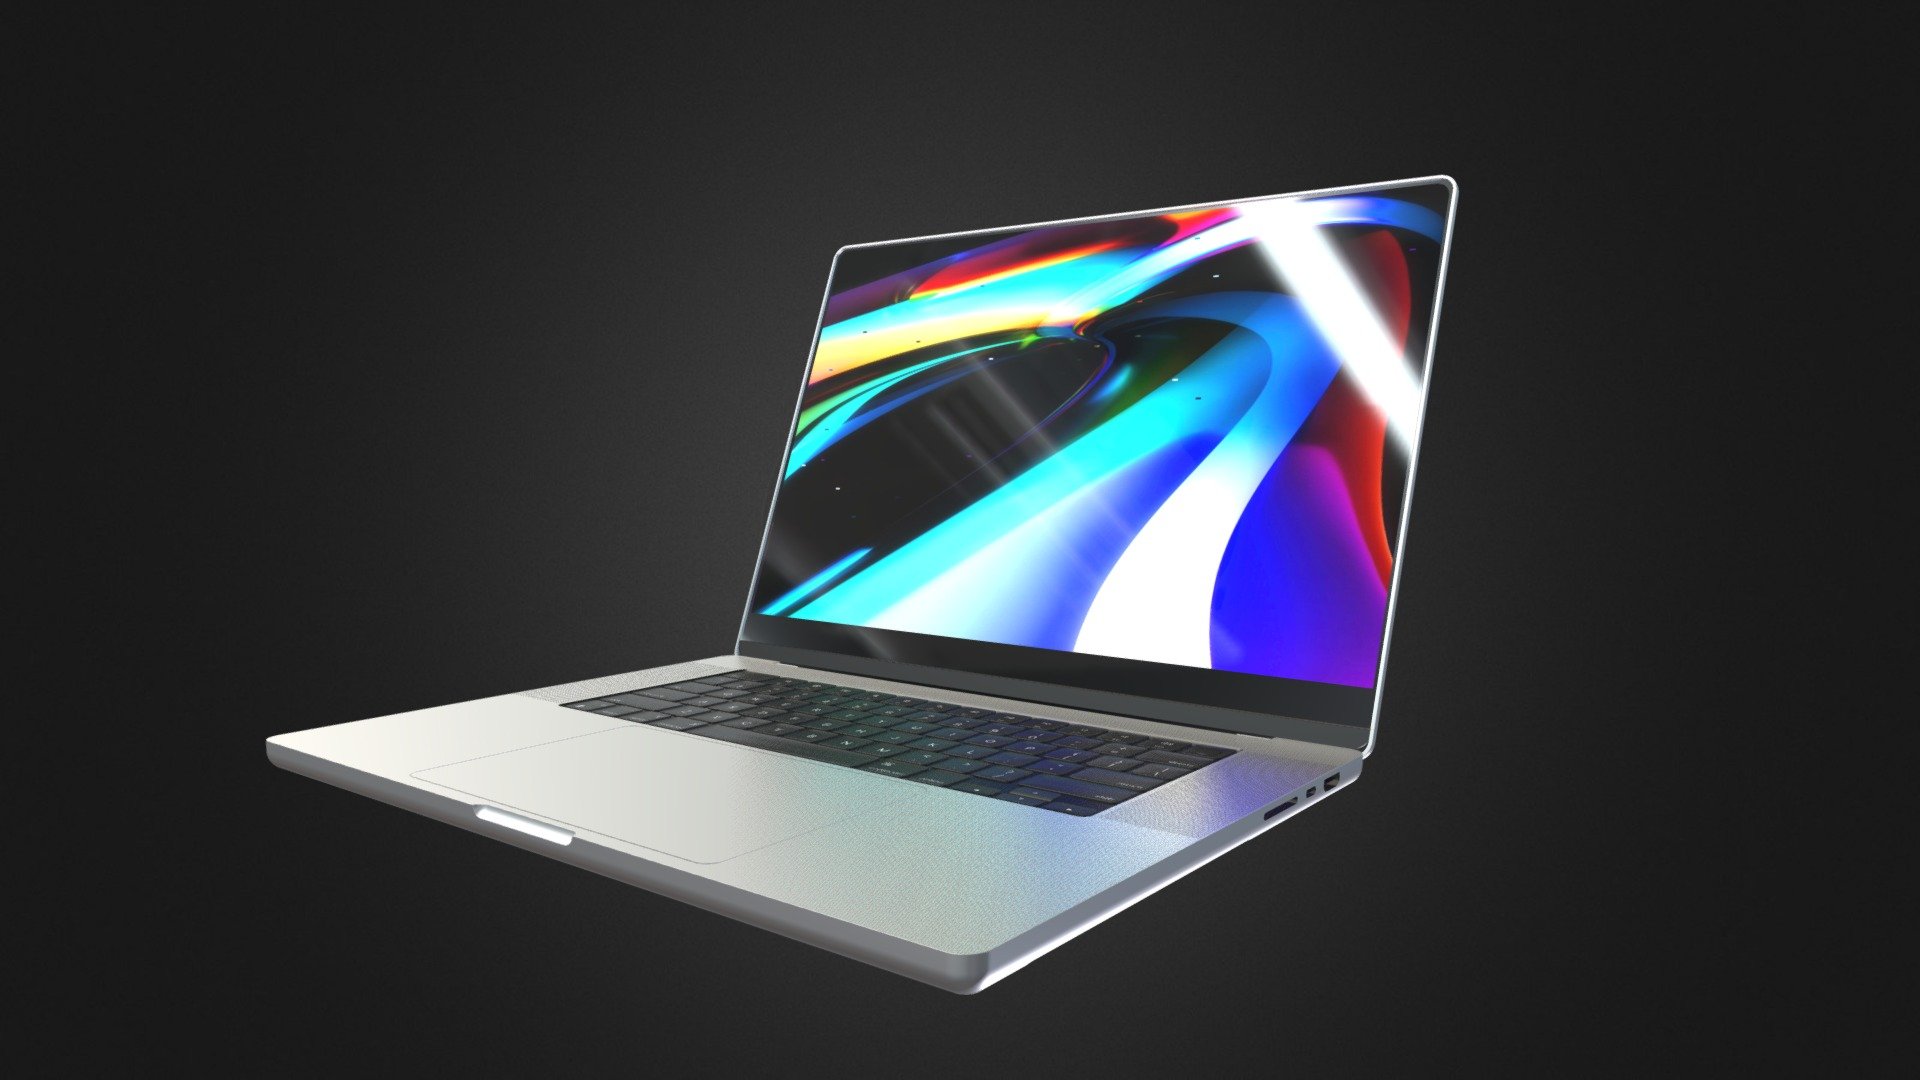 High Poly M1 16 inch MacBook pro. This took me while to make and I think its the best I made so far. You can change the background on the screen to anything you want. Anyways, I hope you enjoy using this model 3d model